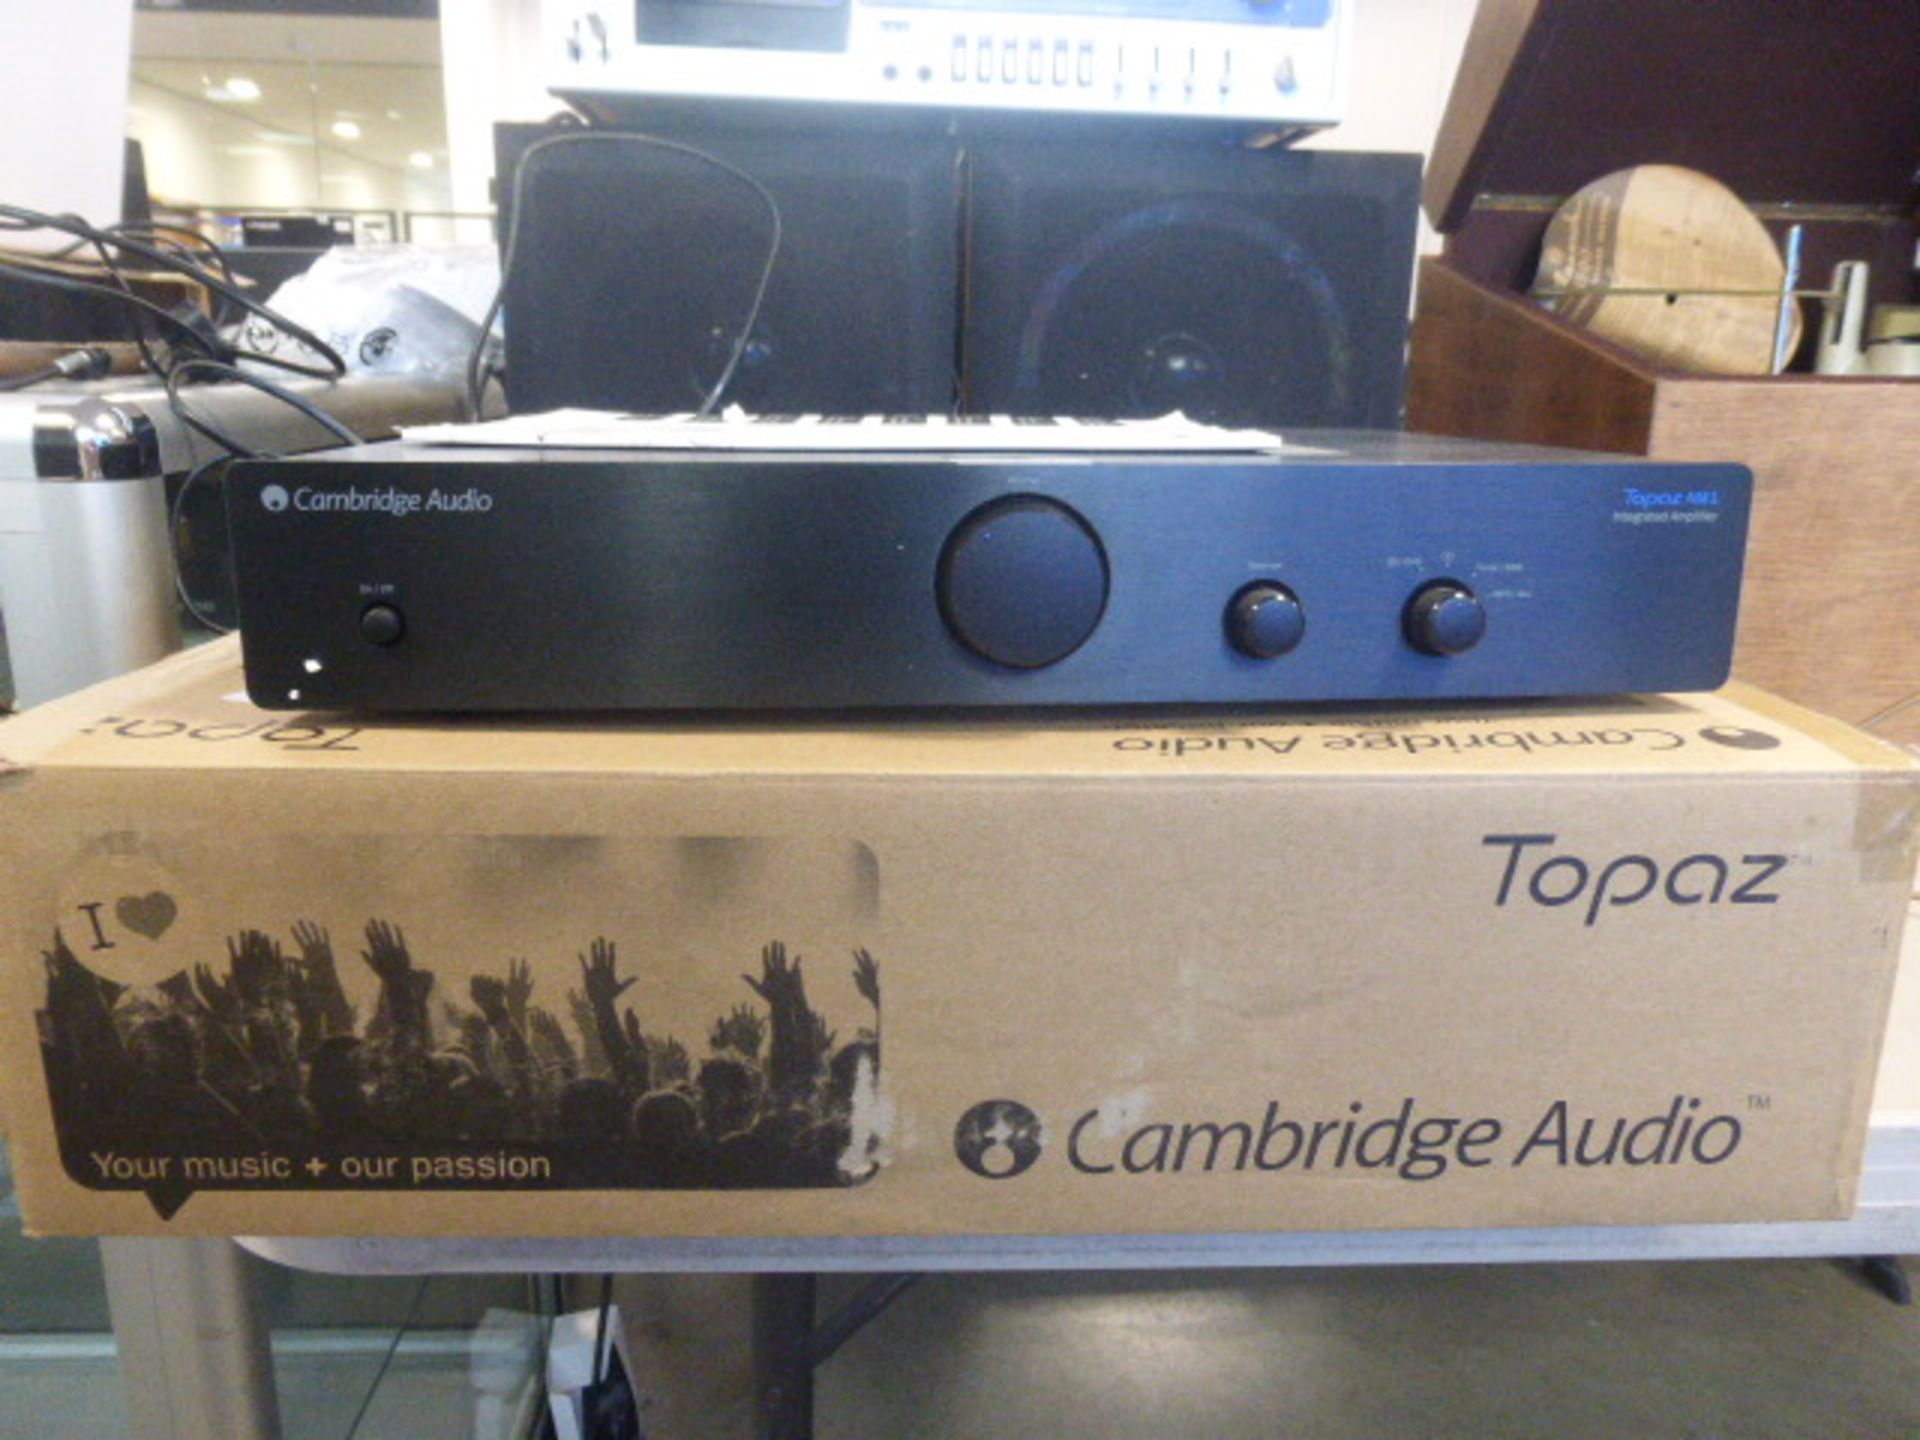 Cambridge audio topaz AM1 integrated amp with box and instruction manual